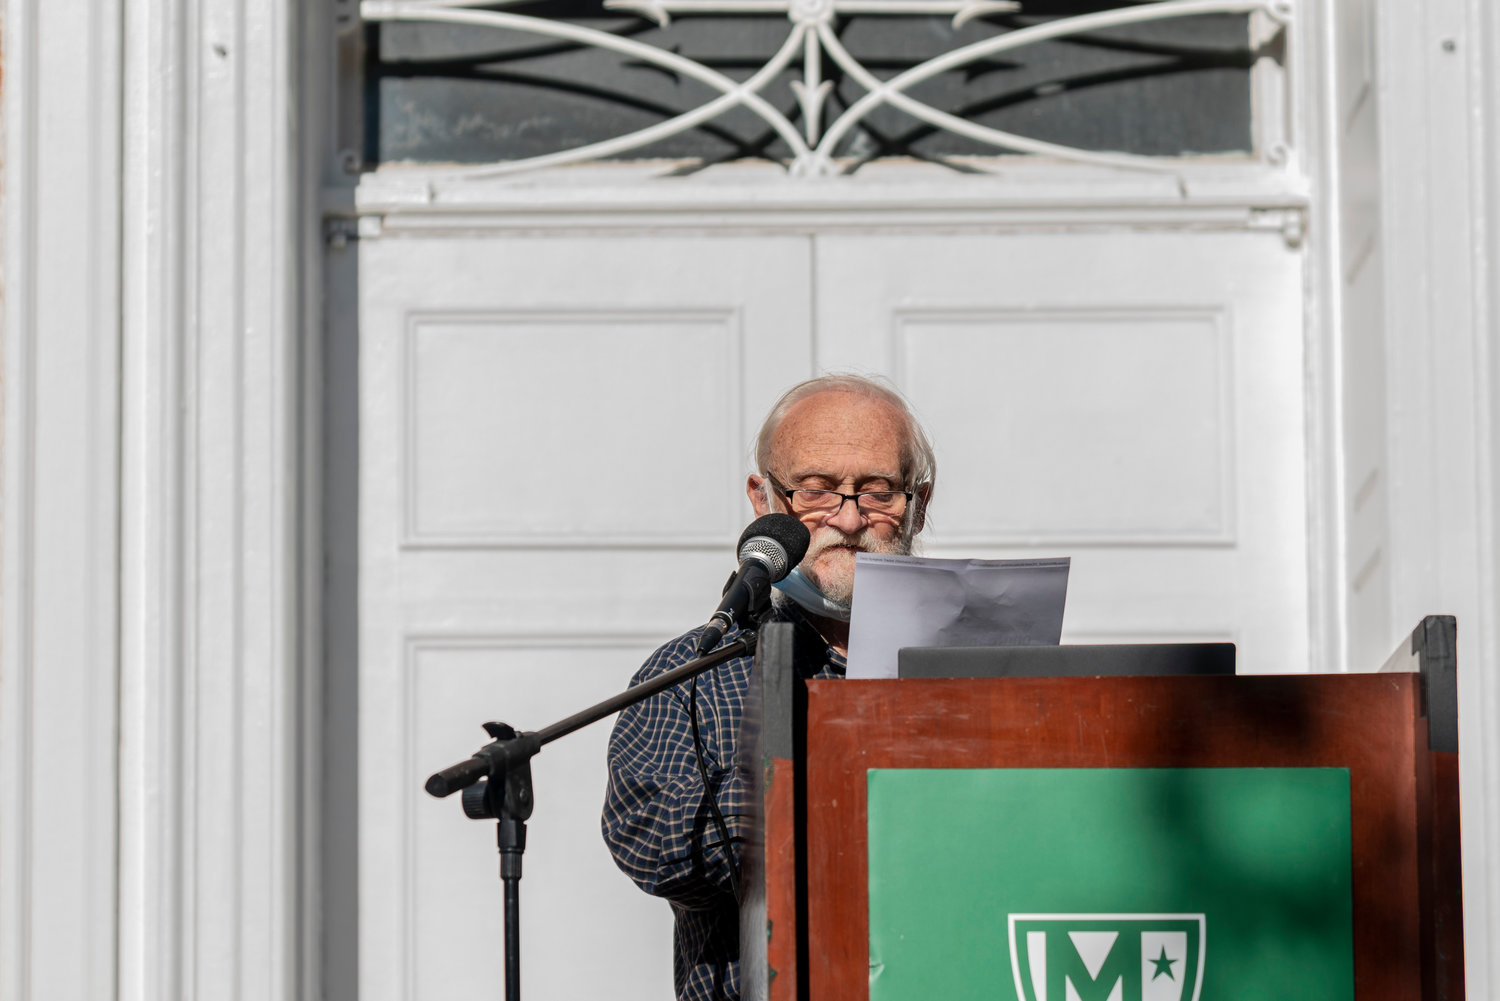 Jim White’s speech at Manhattan College’s ‘shoe strike’ Sept. 22 was a bit unorthodox. He favored a ‘call-and-response’ rhetoric for his remarks, as opposed to a typical one-sided speech.